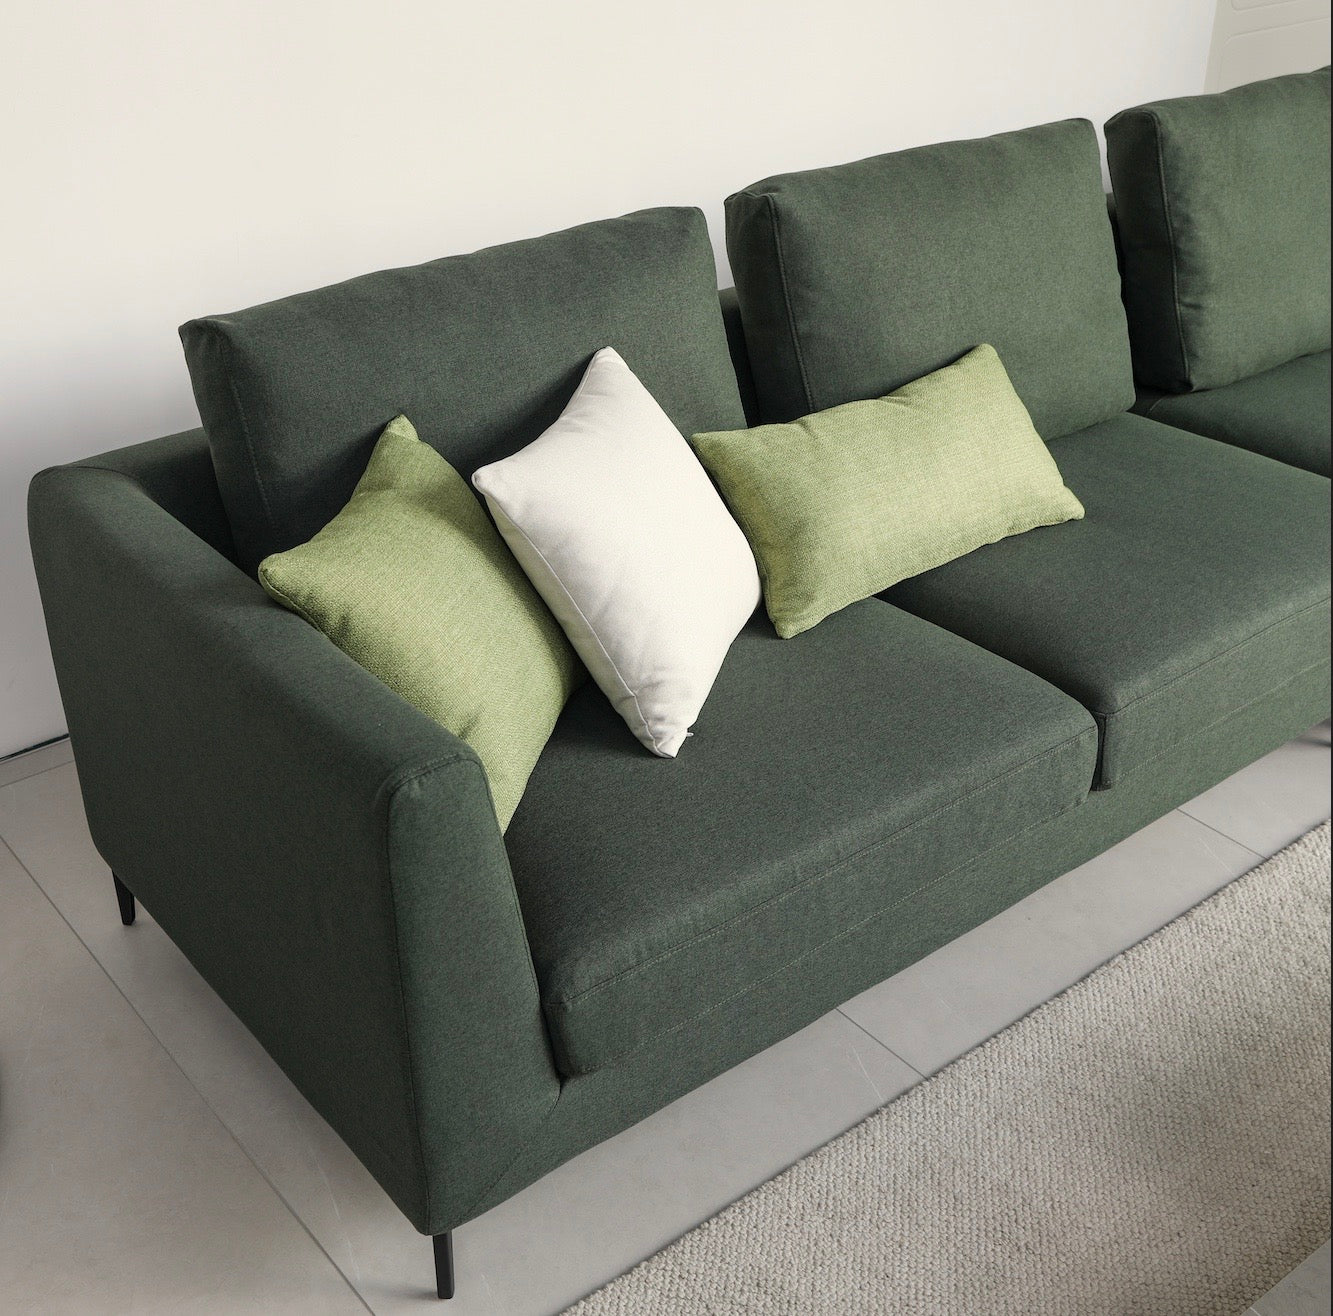 Mary Sectional Sofa Left Chaise - Green